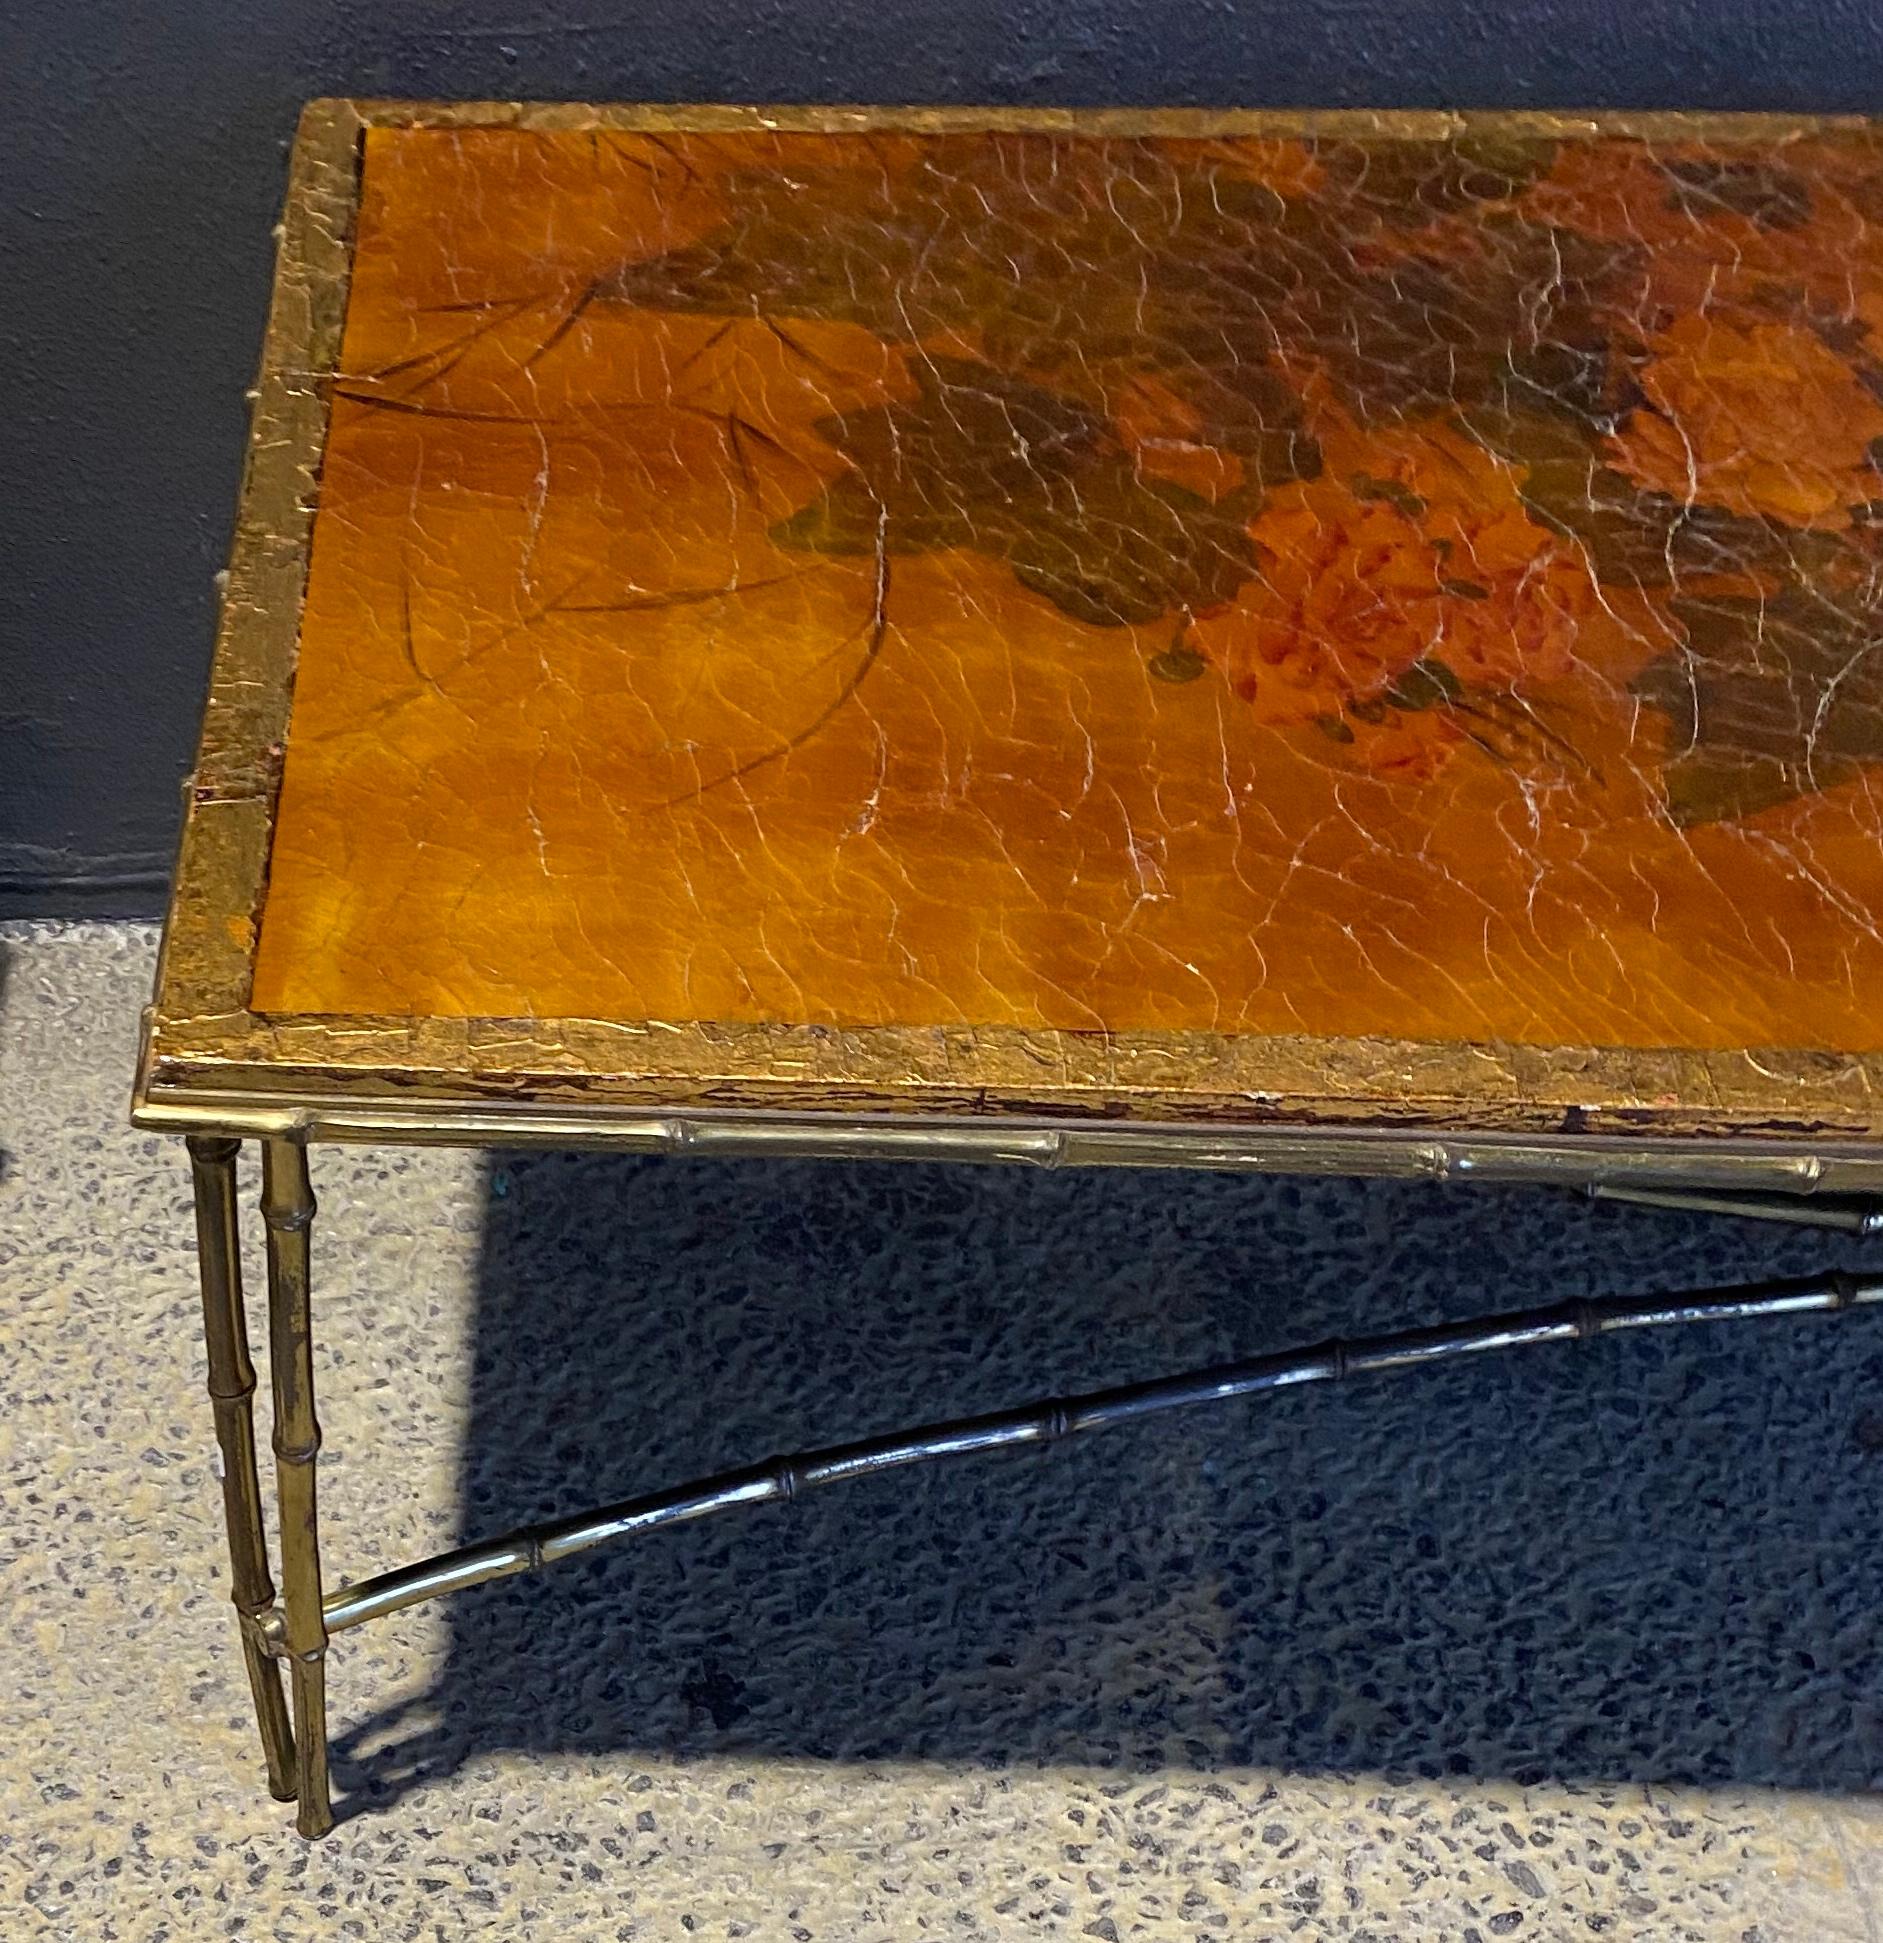 Coffee table, Chinese lacquer top with Chinese characters, cracked surface with gold surround, bamboo decor uprights in bronze with double legs, all the elements are screwed. Single order piece.
Circa 1950/70
condition of use
We protect with a